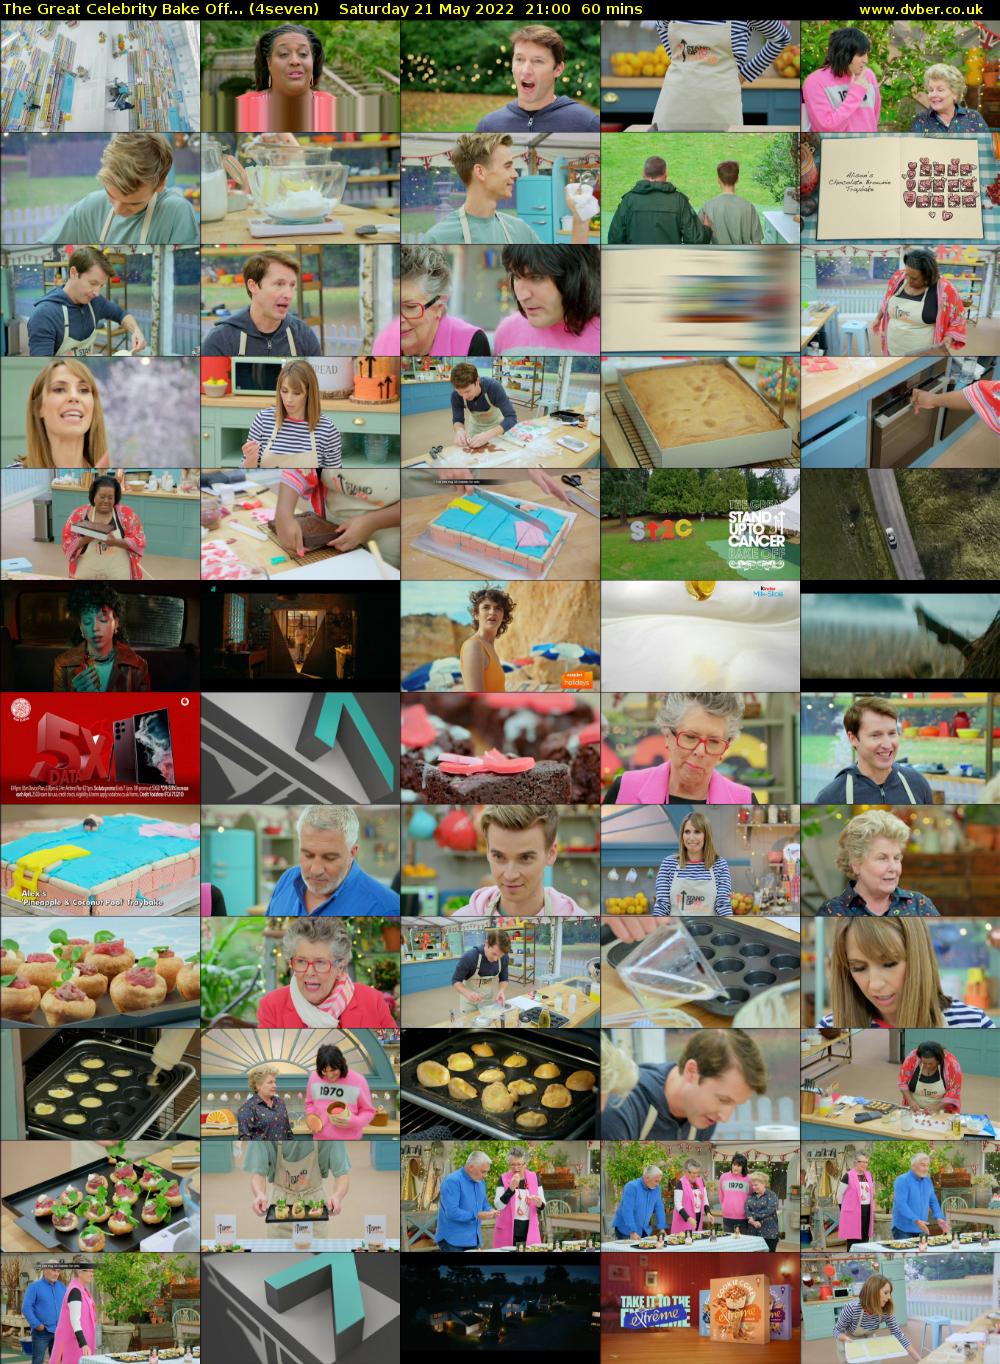 The Great Celebrity Bake Off... (4seven) Saturday 21 May 2022 21:00 - 22:00